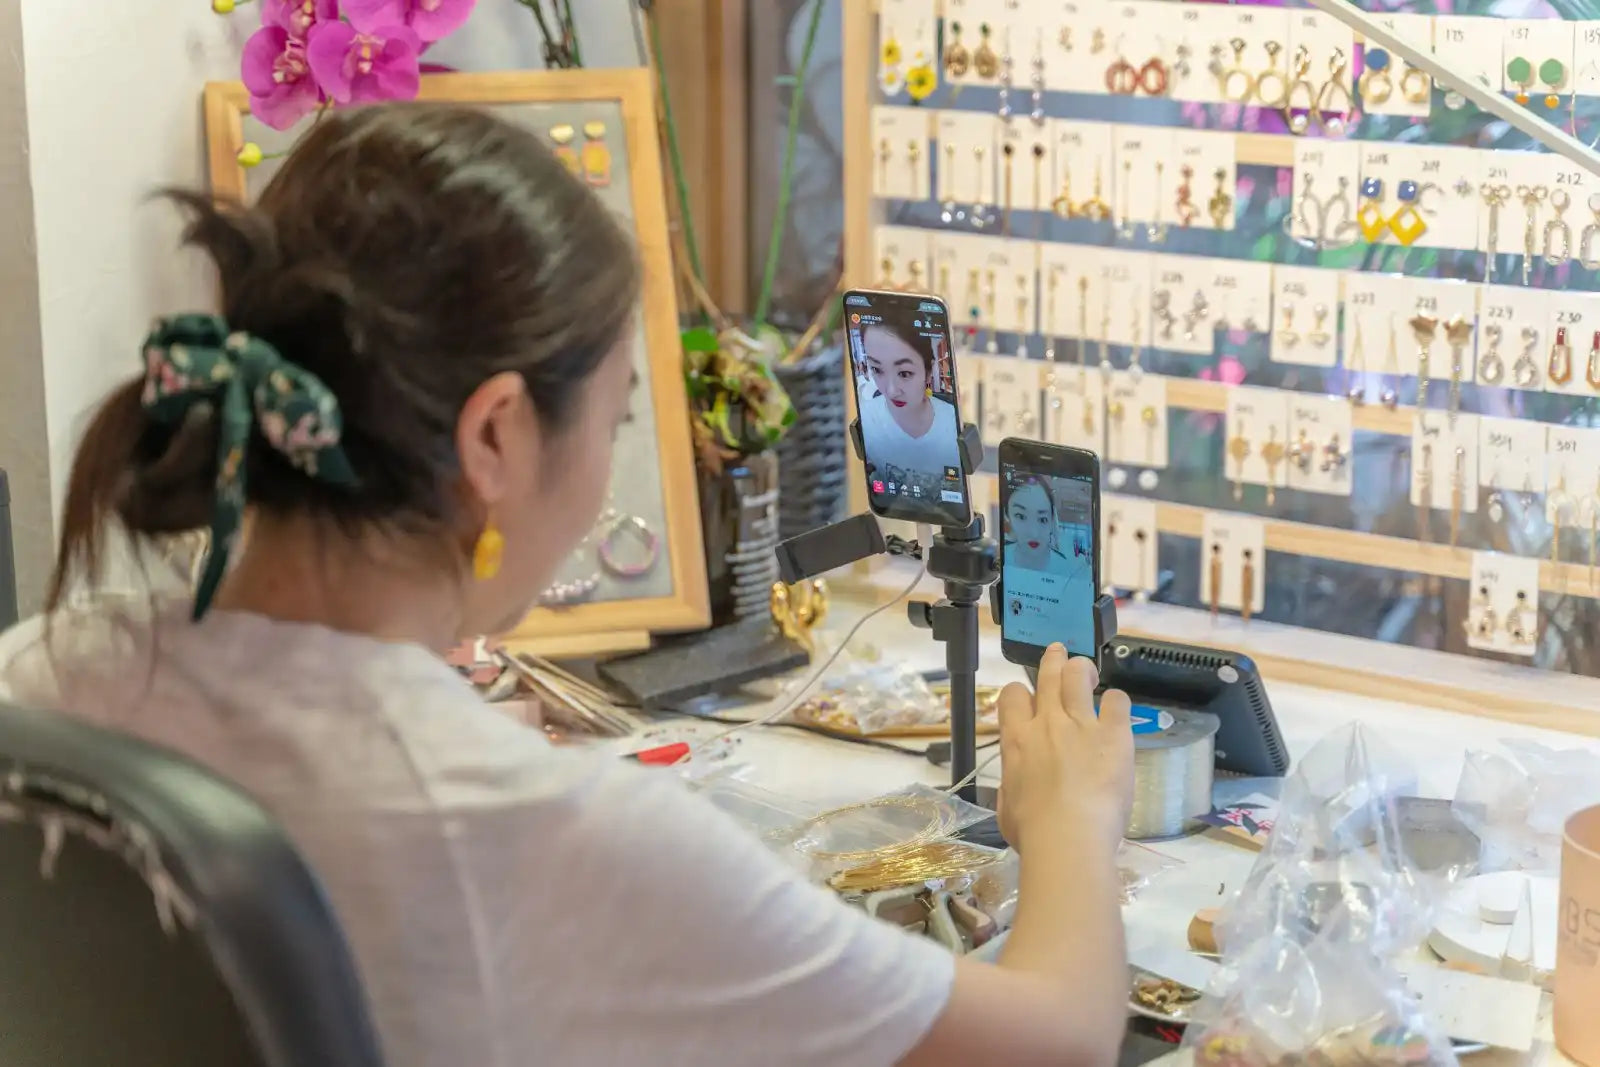 A girl sells jewelry online through a live stream